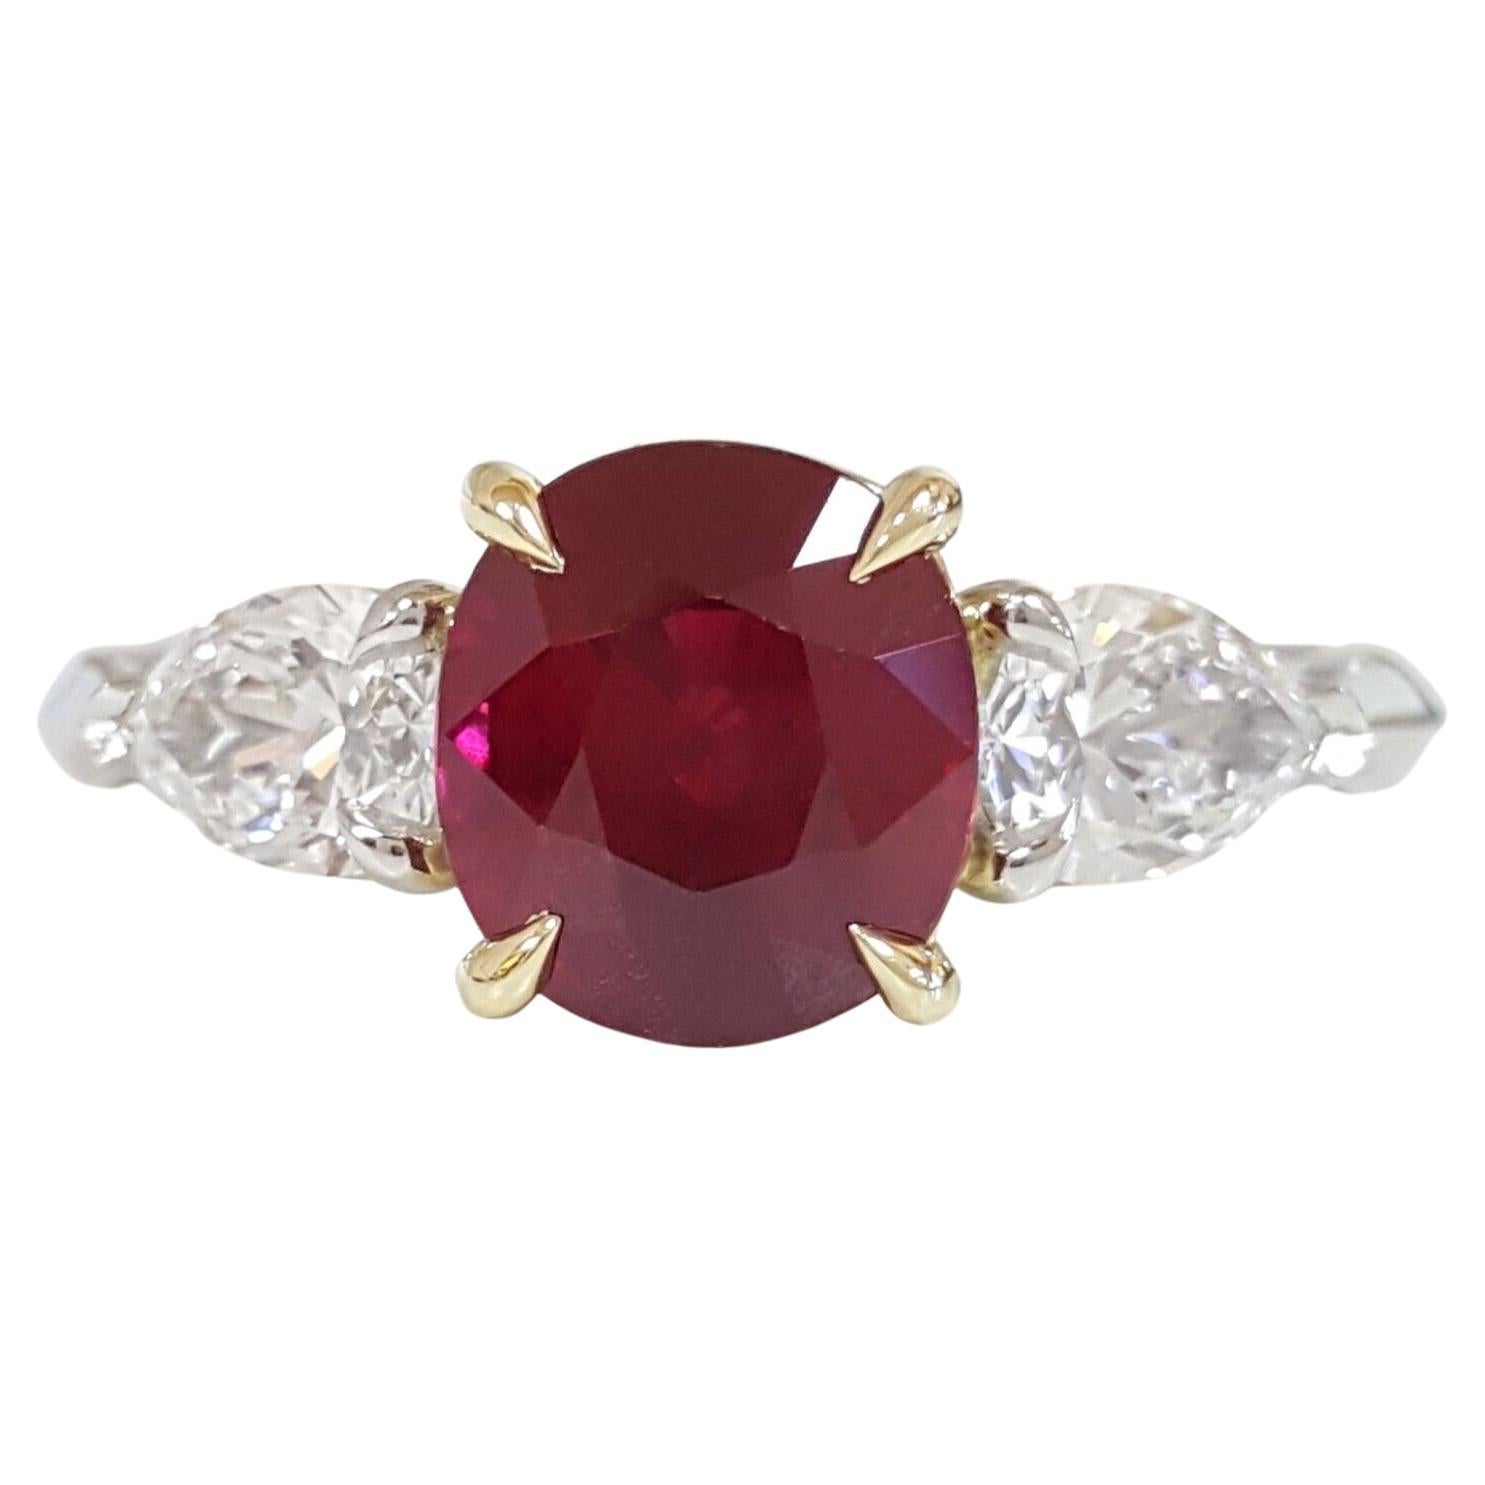 Authentic Tiffany & Co. Burma Ruby Diamond Halo Ring For Sale